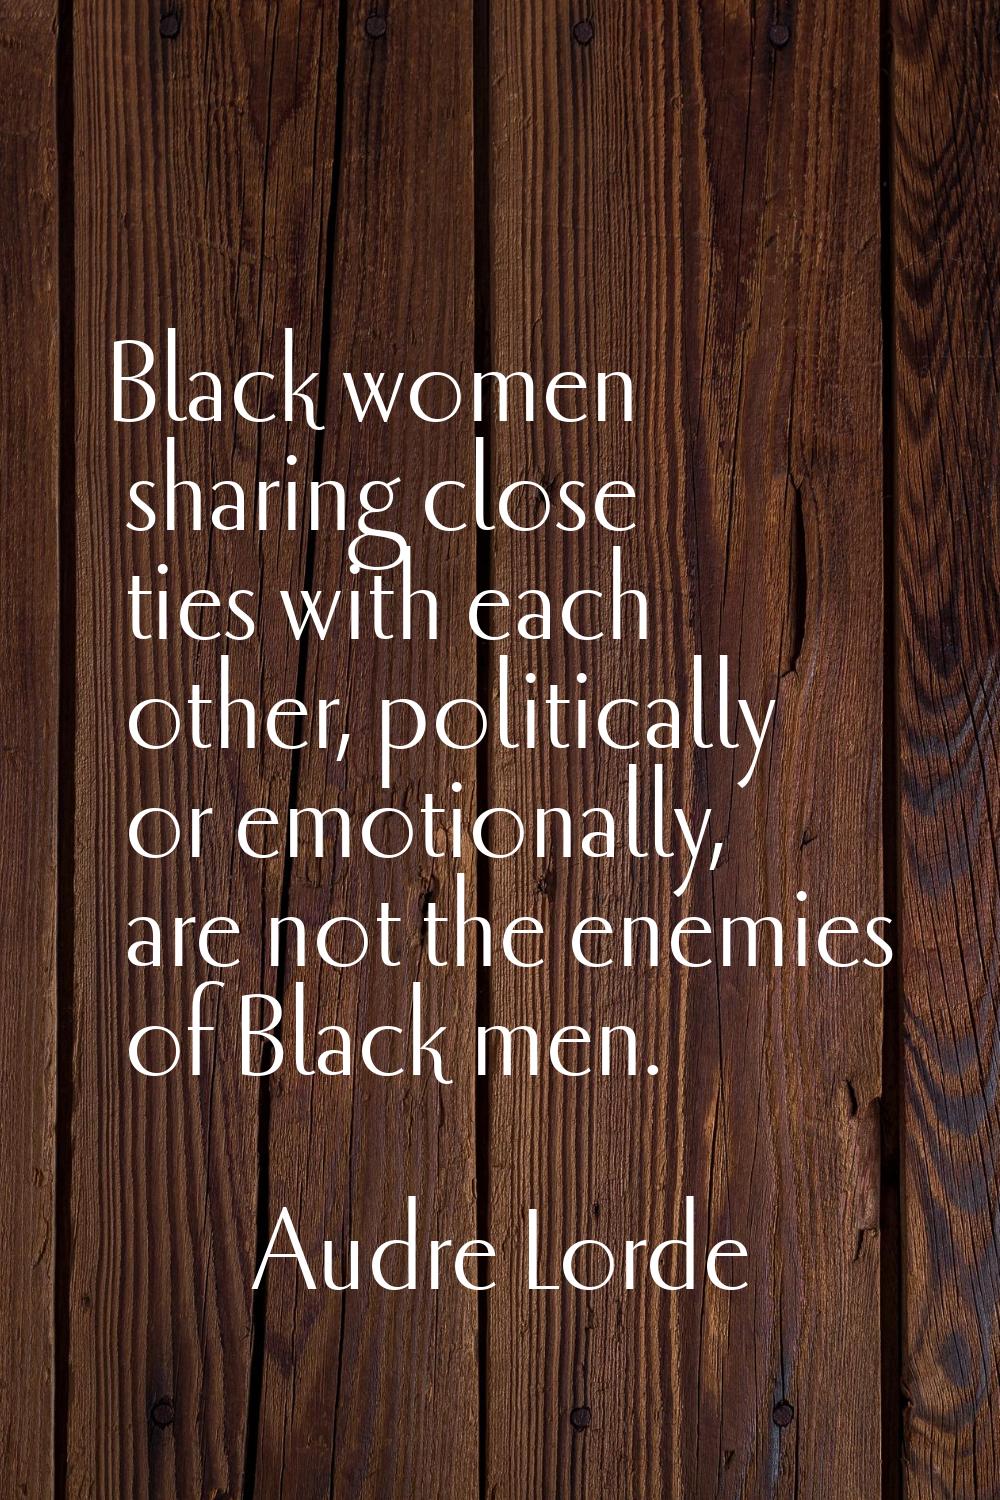 Black women sharing close ties with each other, politically or emotionally, are not the enemies of 